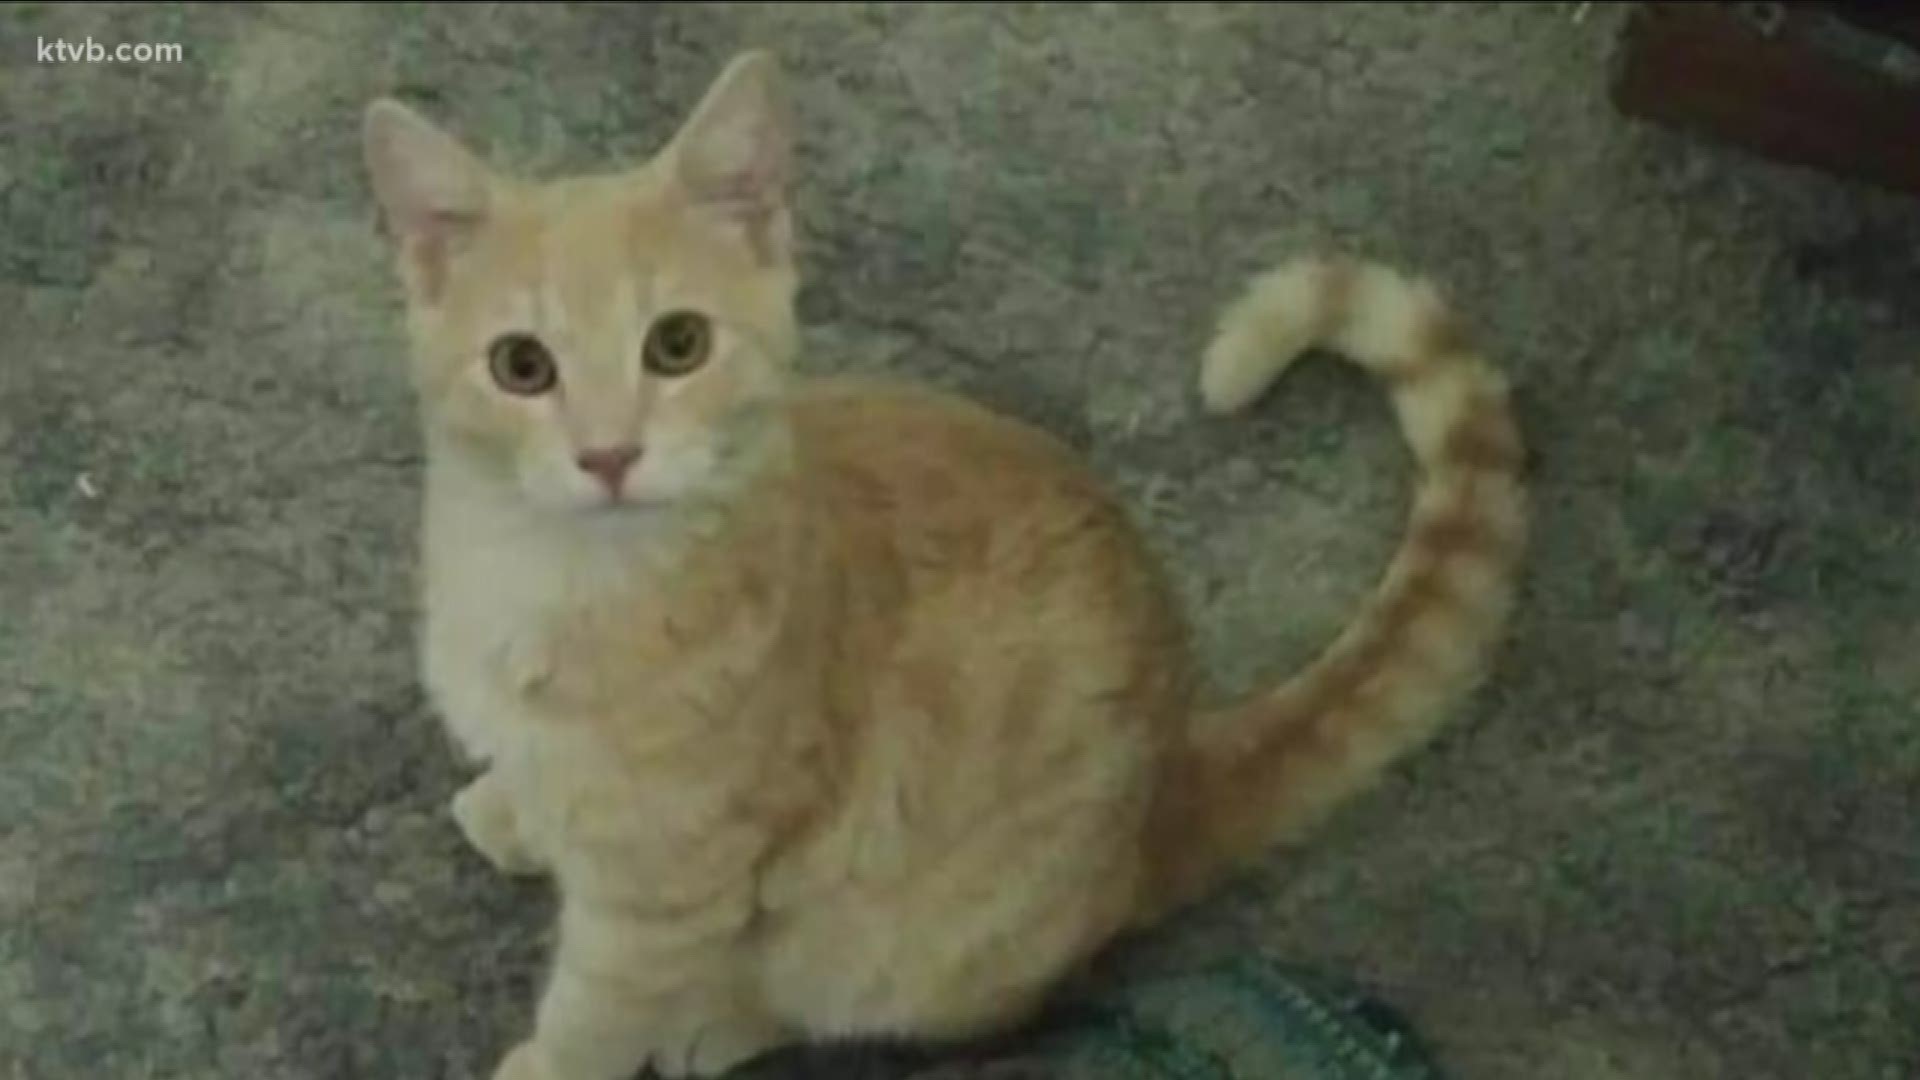 "He was my best friend and it happened so quick and I was just devastated to let him go it just makes me sad someone would do that," the cat's owner said.